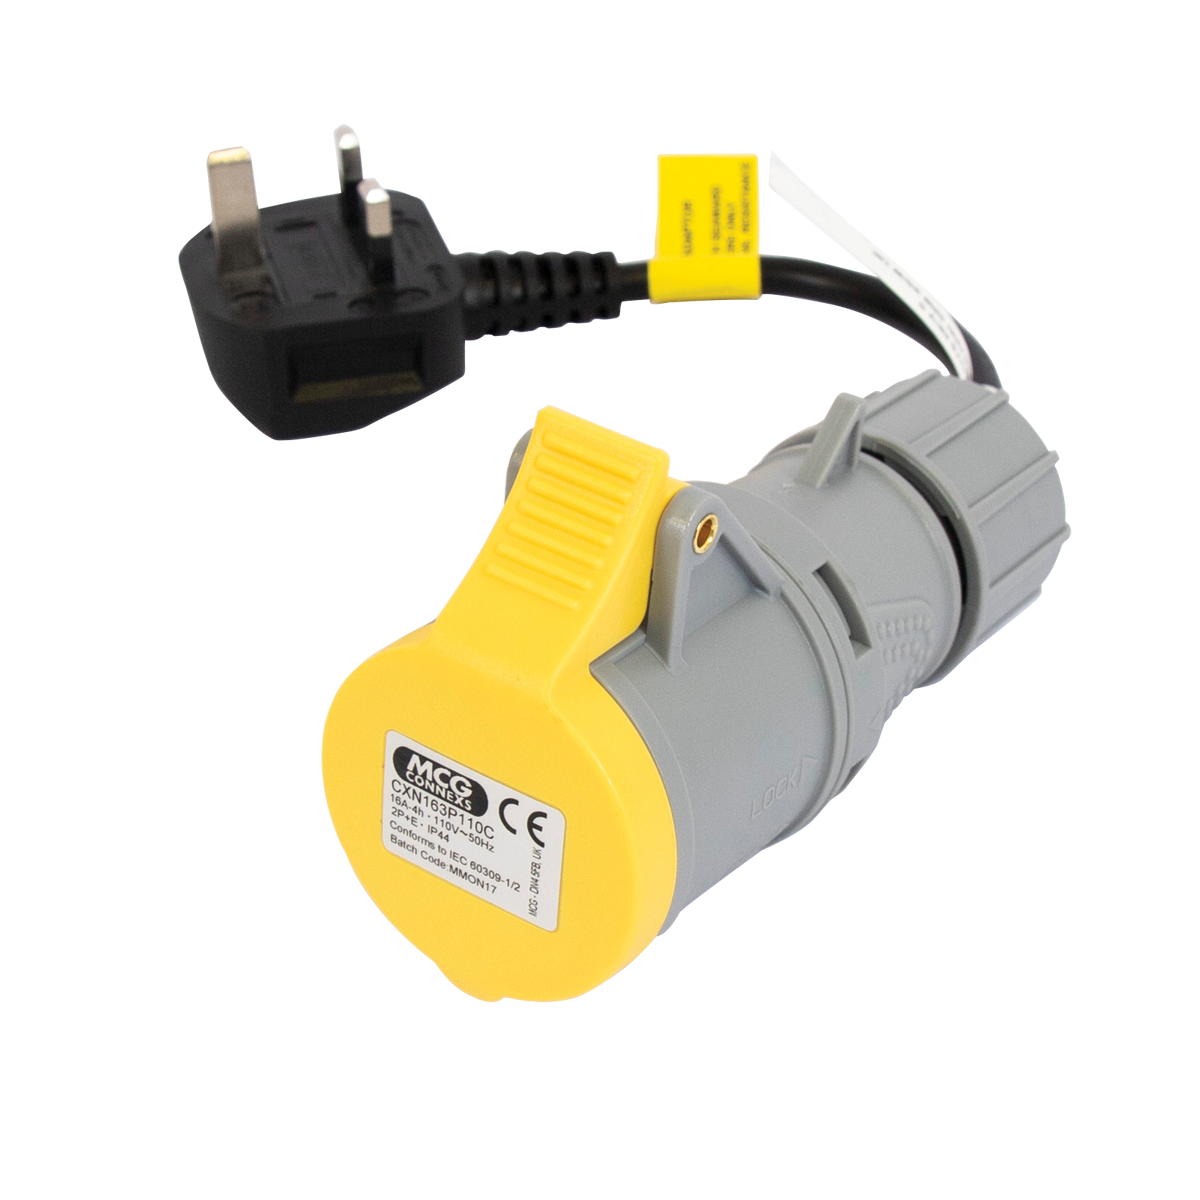 YELLOW 110V PAT TESTING ADAPTER 2P+E Fof PAT TEST ONLY.FOR QUALIFIED PAT TESTERS 